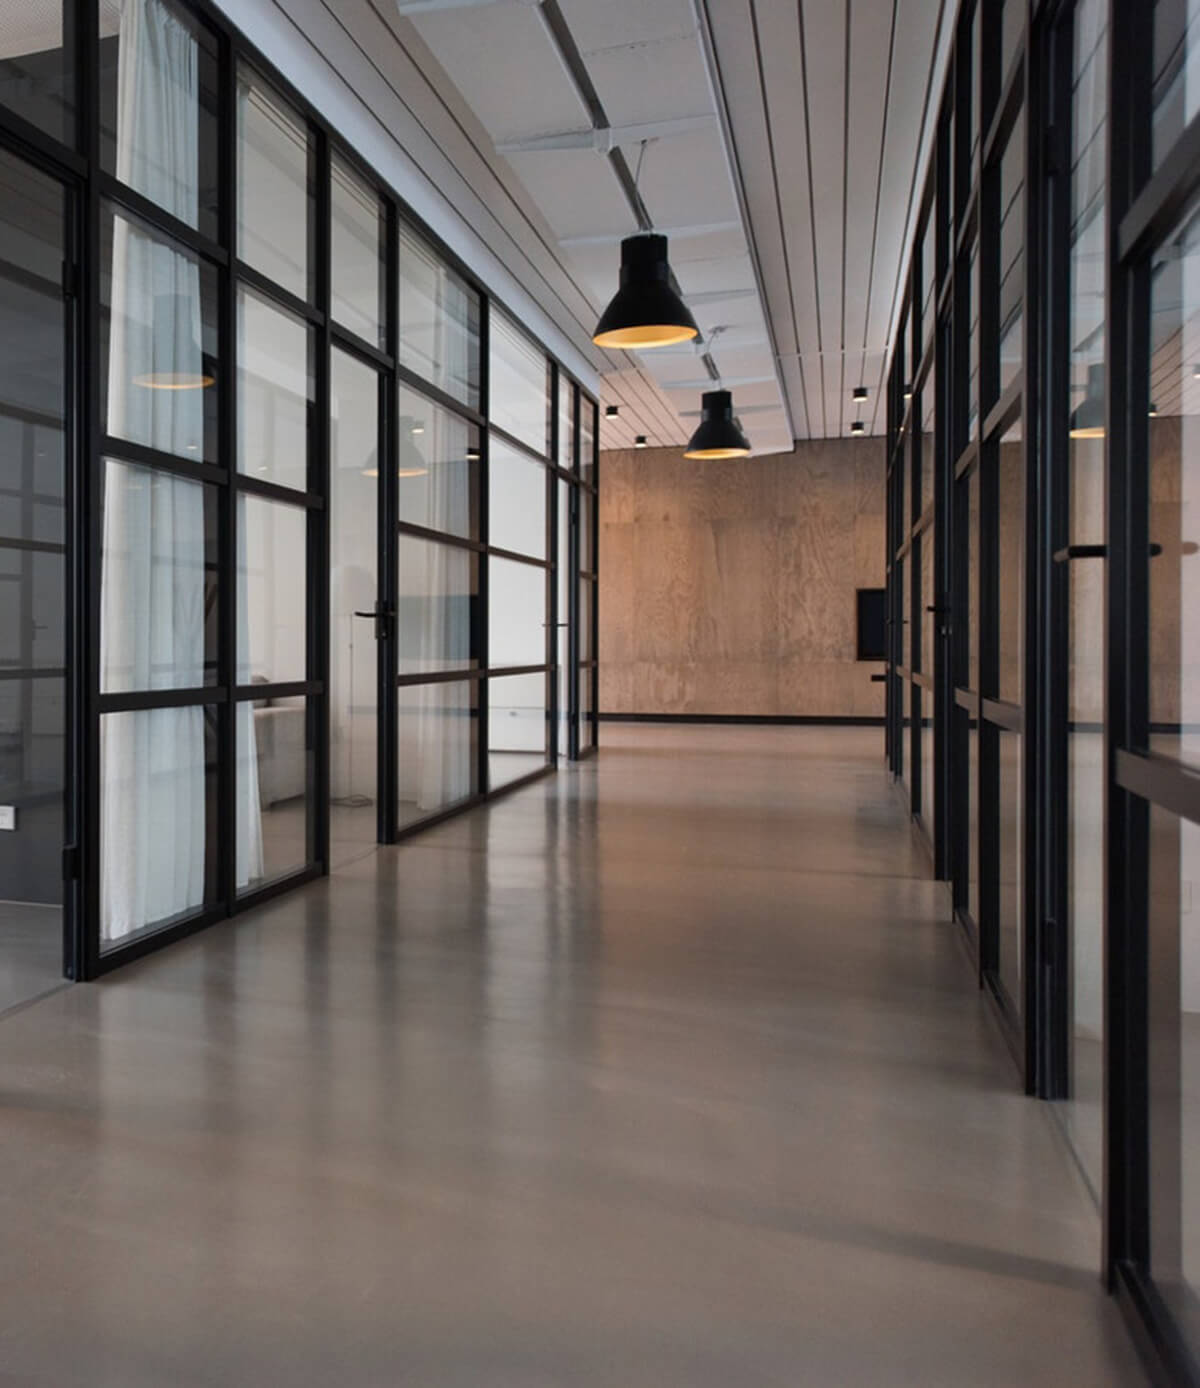 Image of an empty hallway in a modern office building.